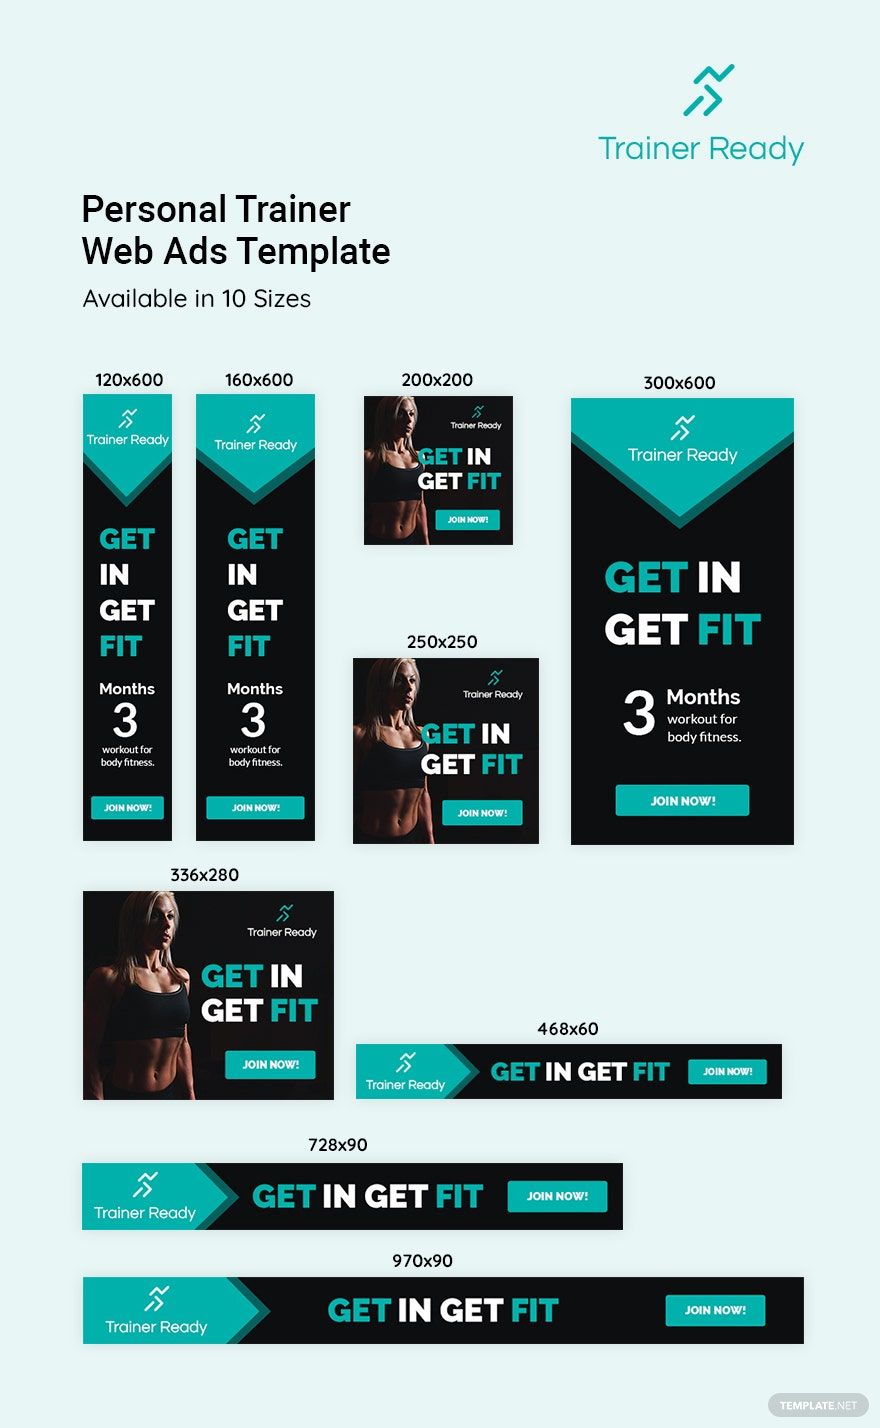 Personal Trainer Web Ads Template